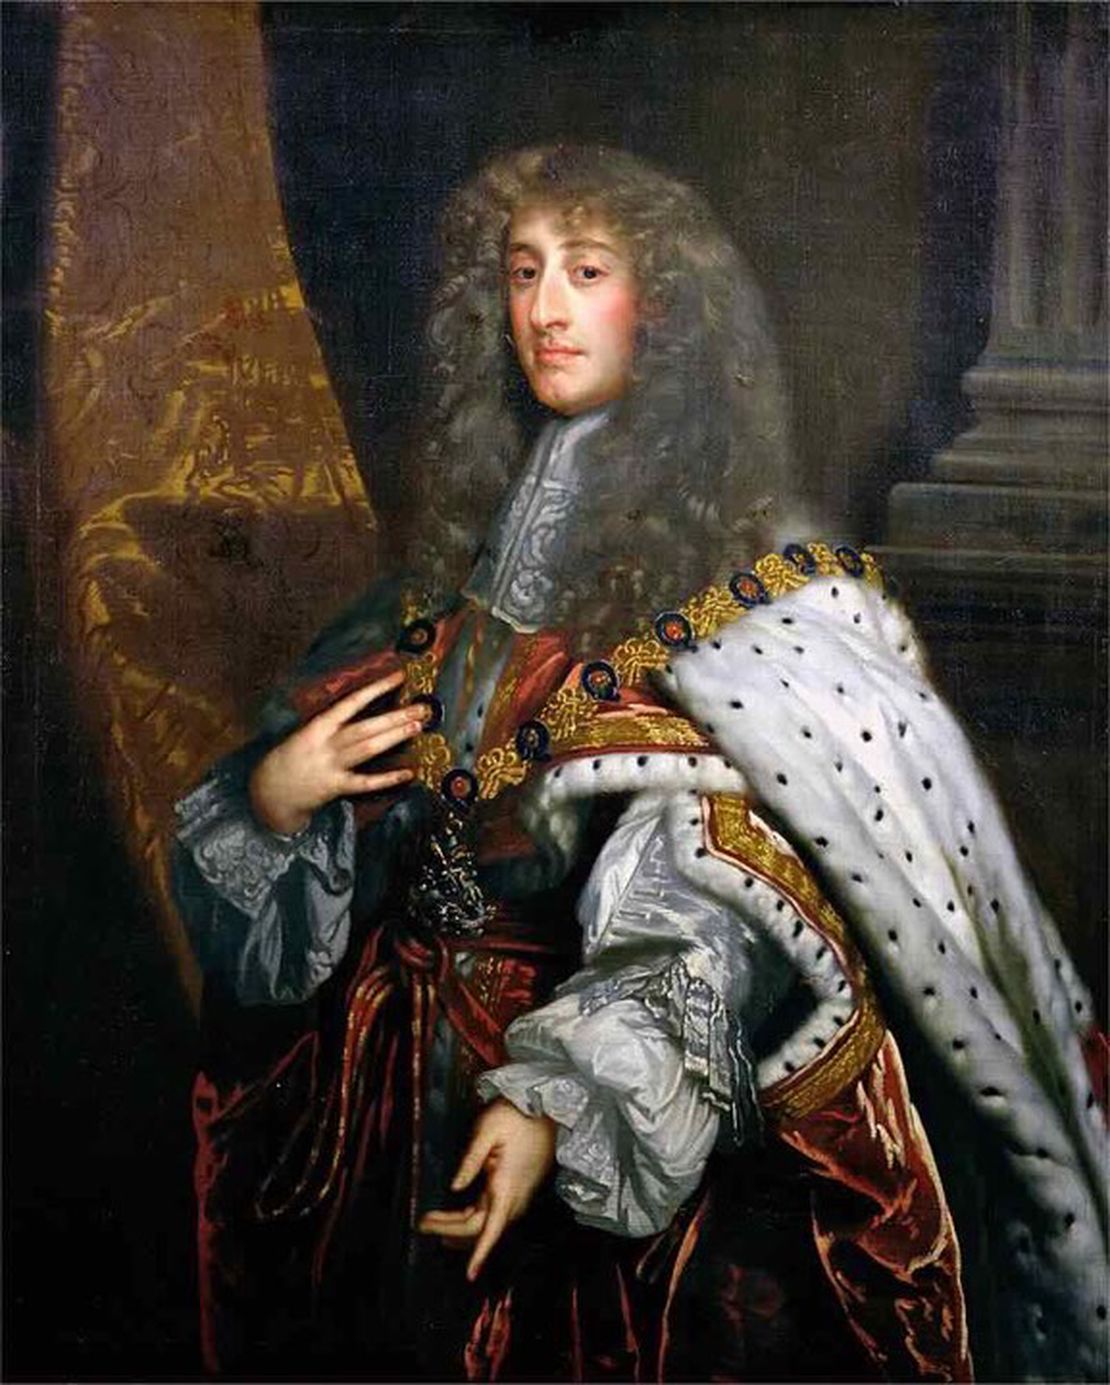 James VII crowned King of England, Scotland, and Ireland